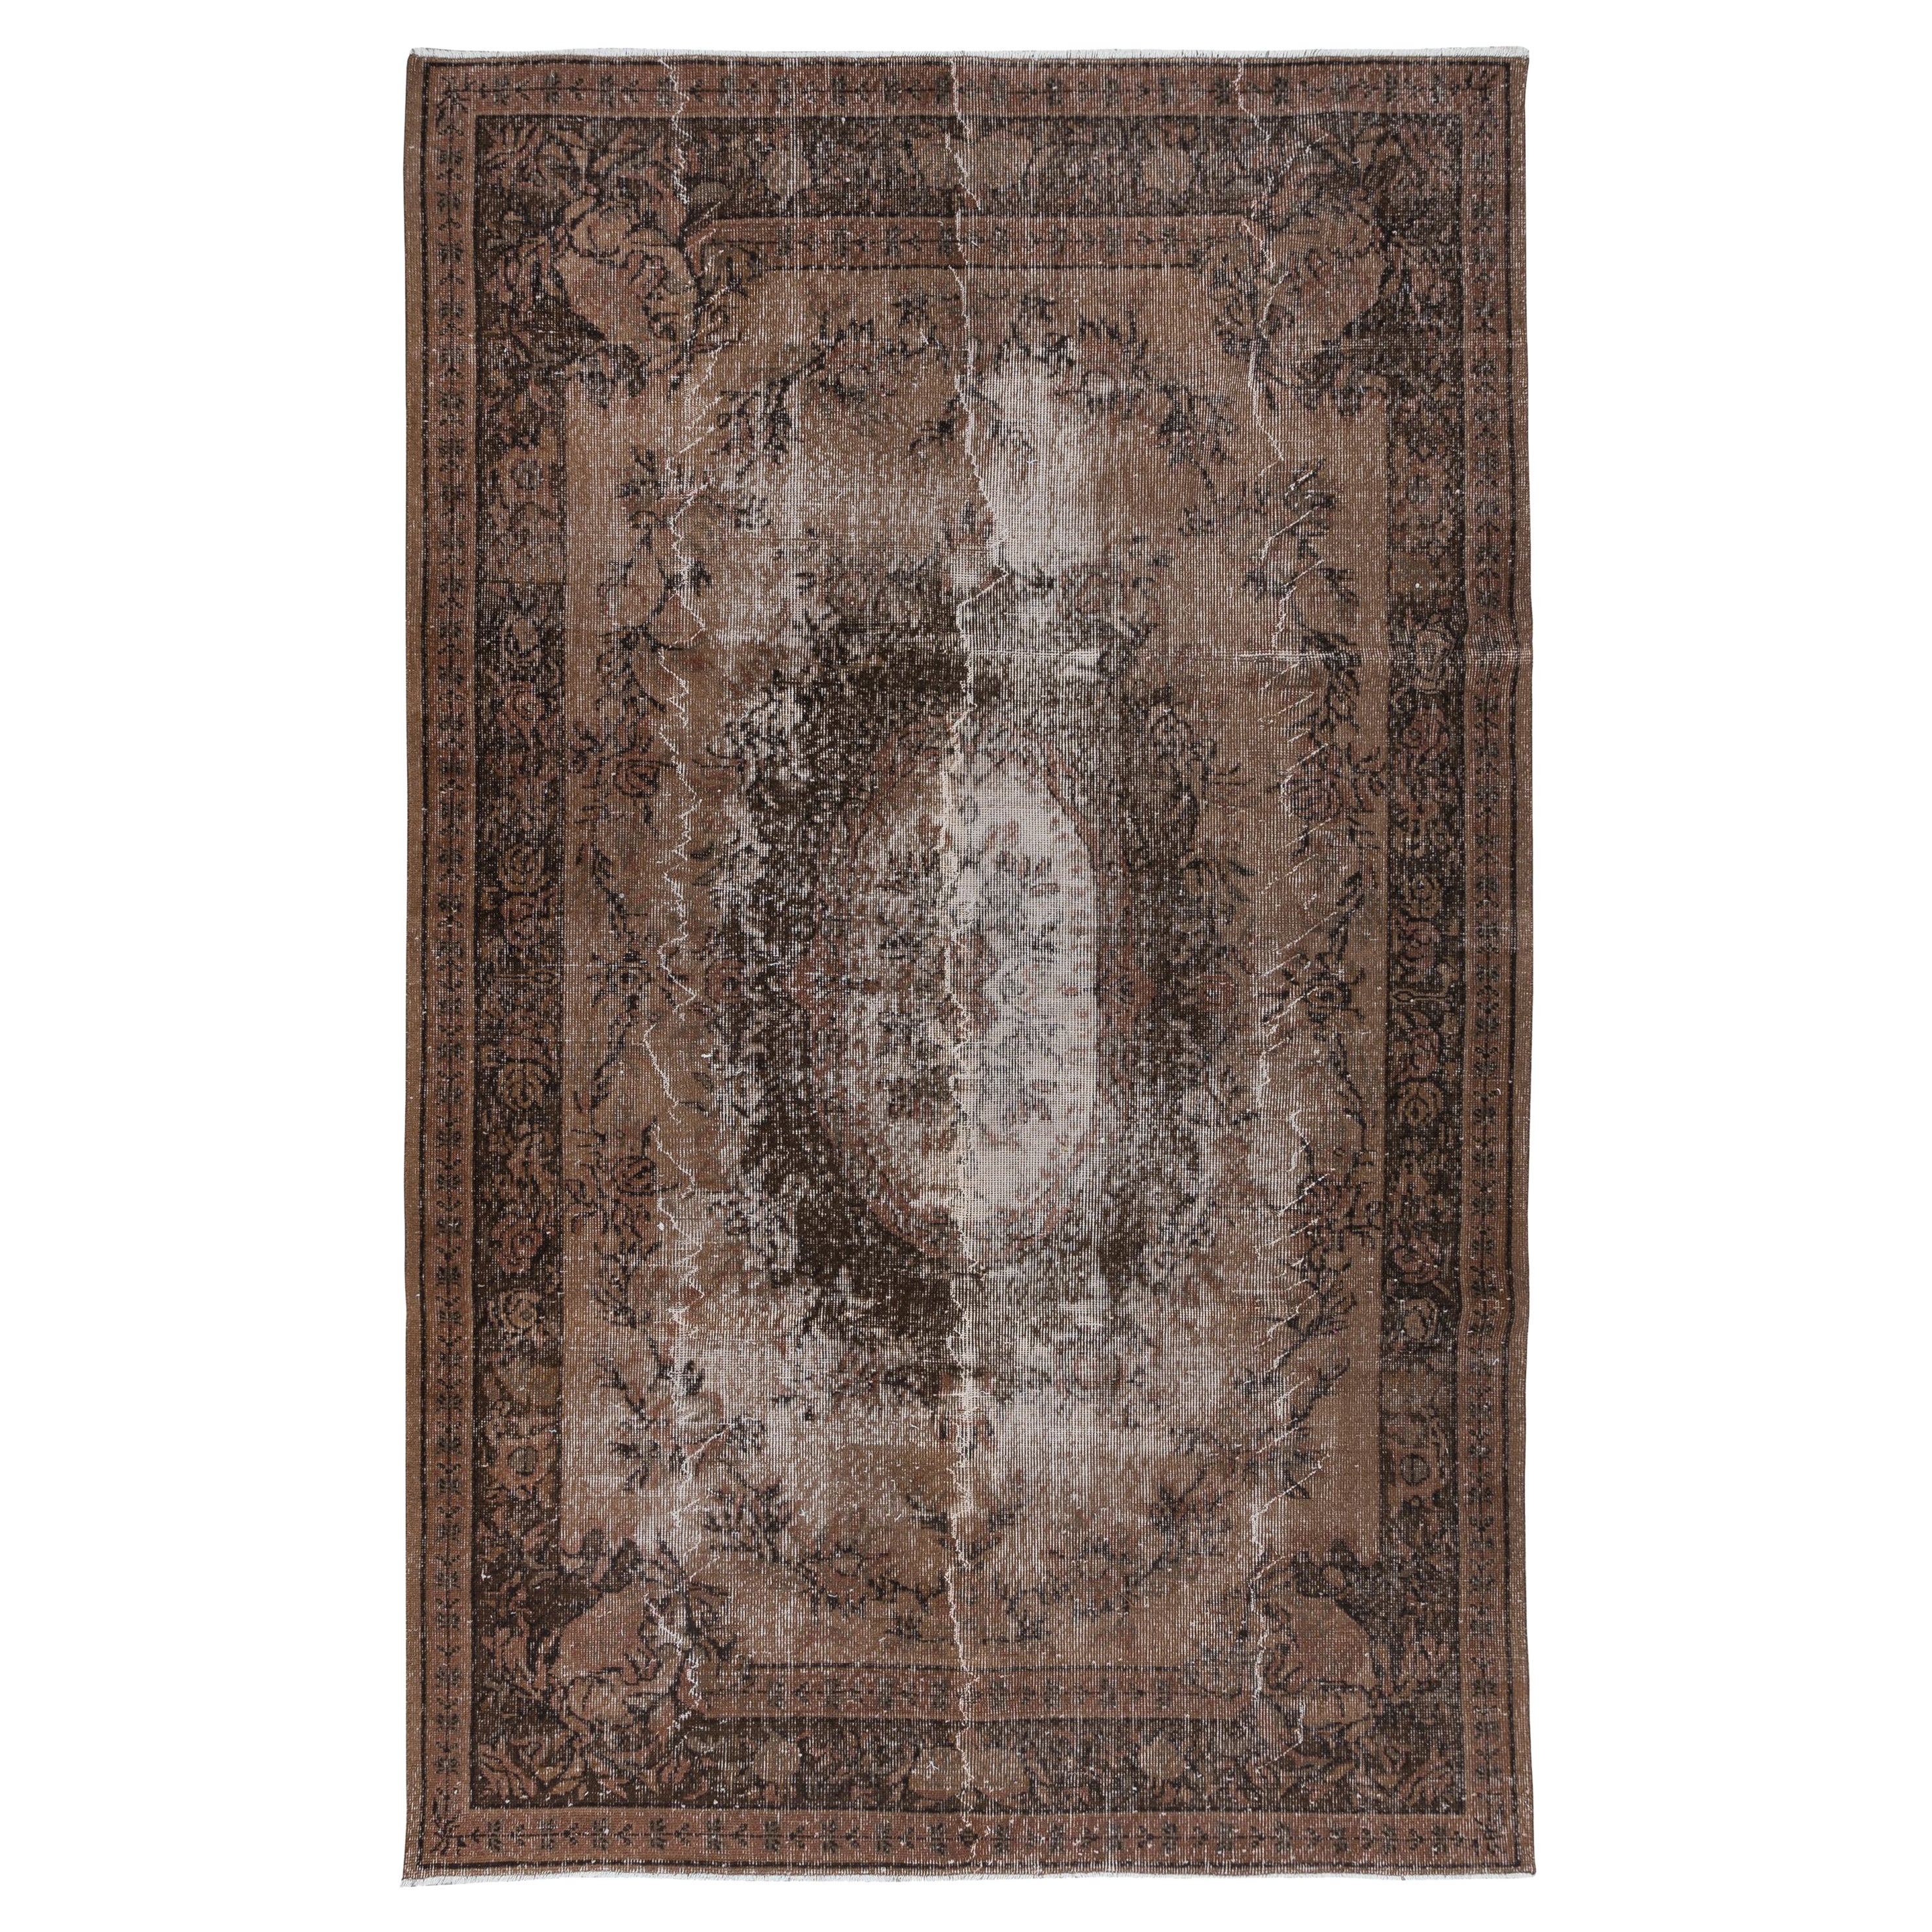 6x9.8 Ft Classic Aubusson Inspired Handmade Turkish Wool Area Rug in Brown For Sale